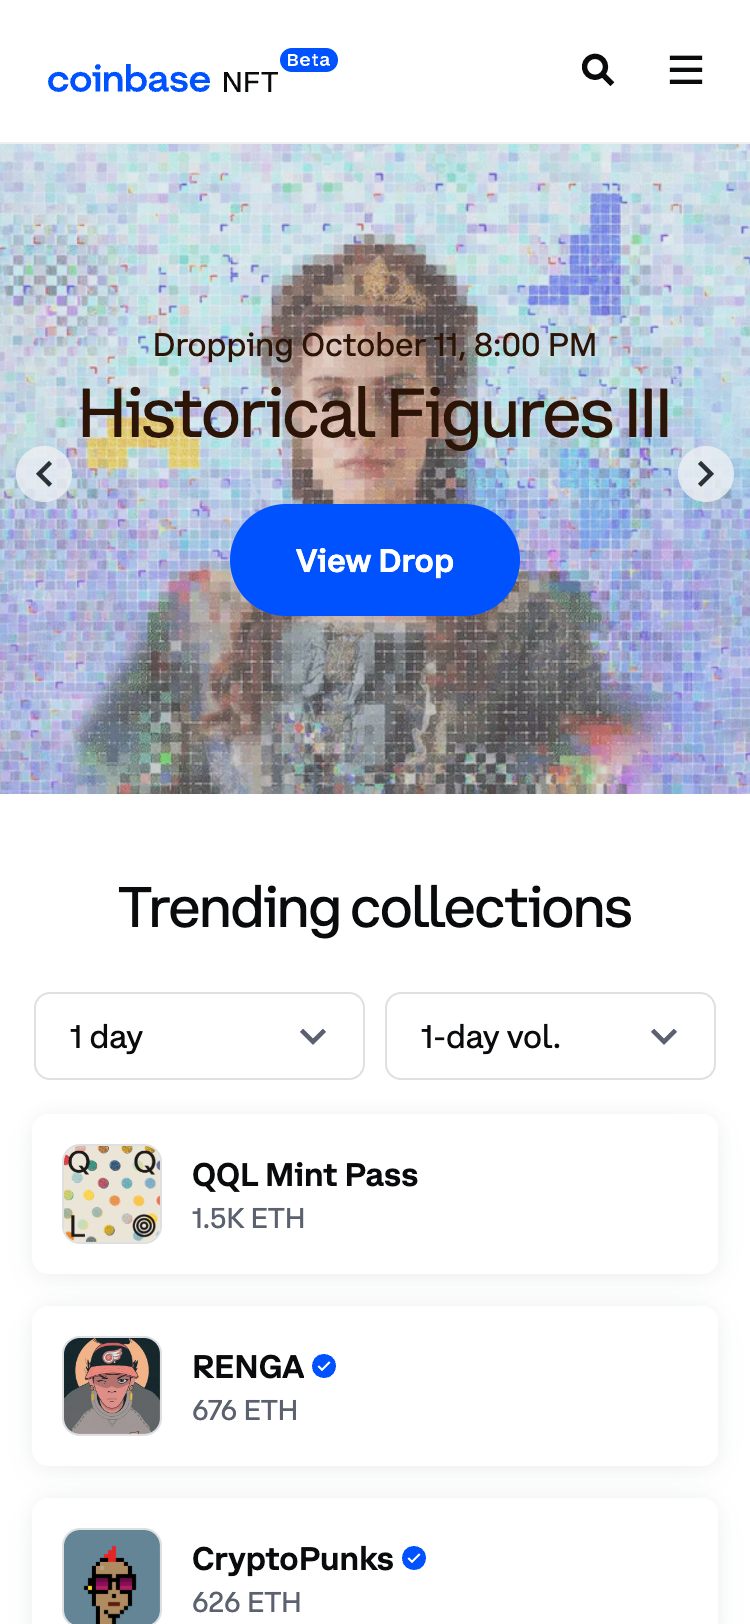 Mobile screenshot of the Coinbase NFT home page. The header contains the Coinbase NFT logo, a search button, and a menu button. The hero section has a background image relating to the featured NFT drop, and a 'View Drop' button in the center. Underneath is a list of trending NFT collections, and each item has a square image along with a name and a price. There are dropdowns above the list to apply filters.